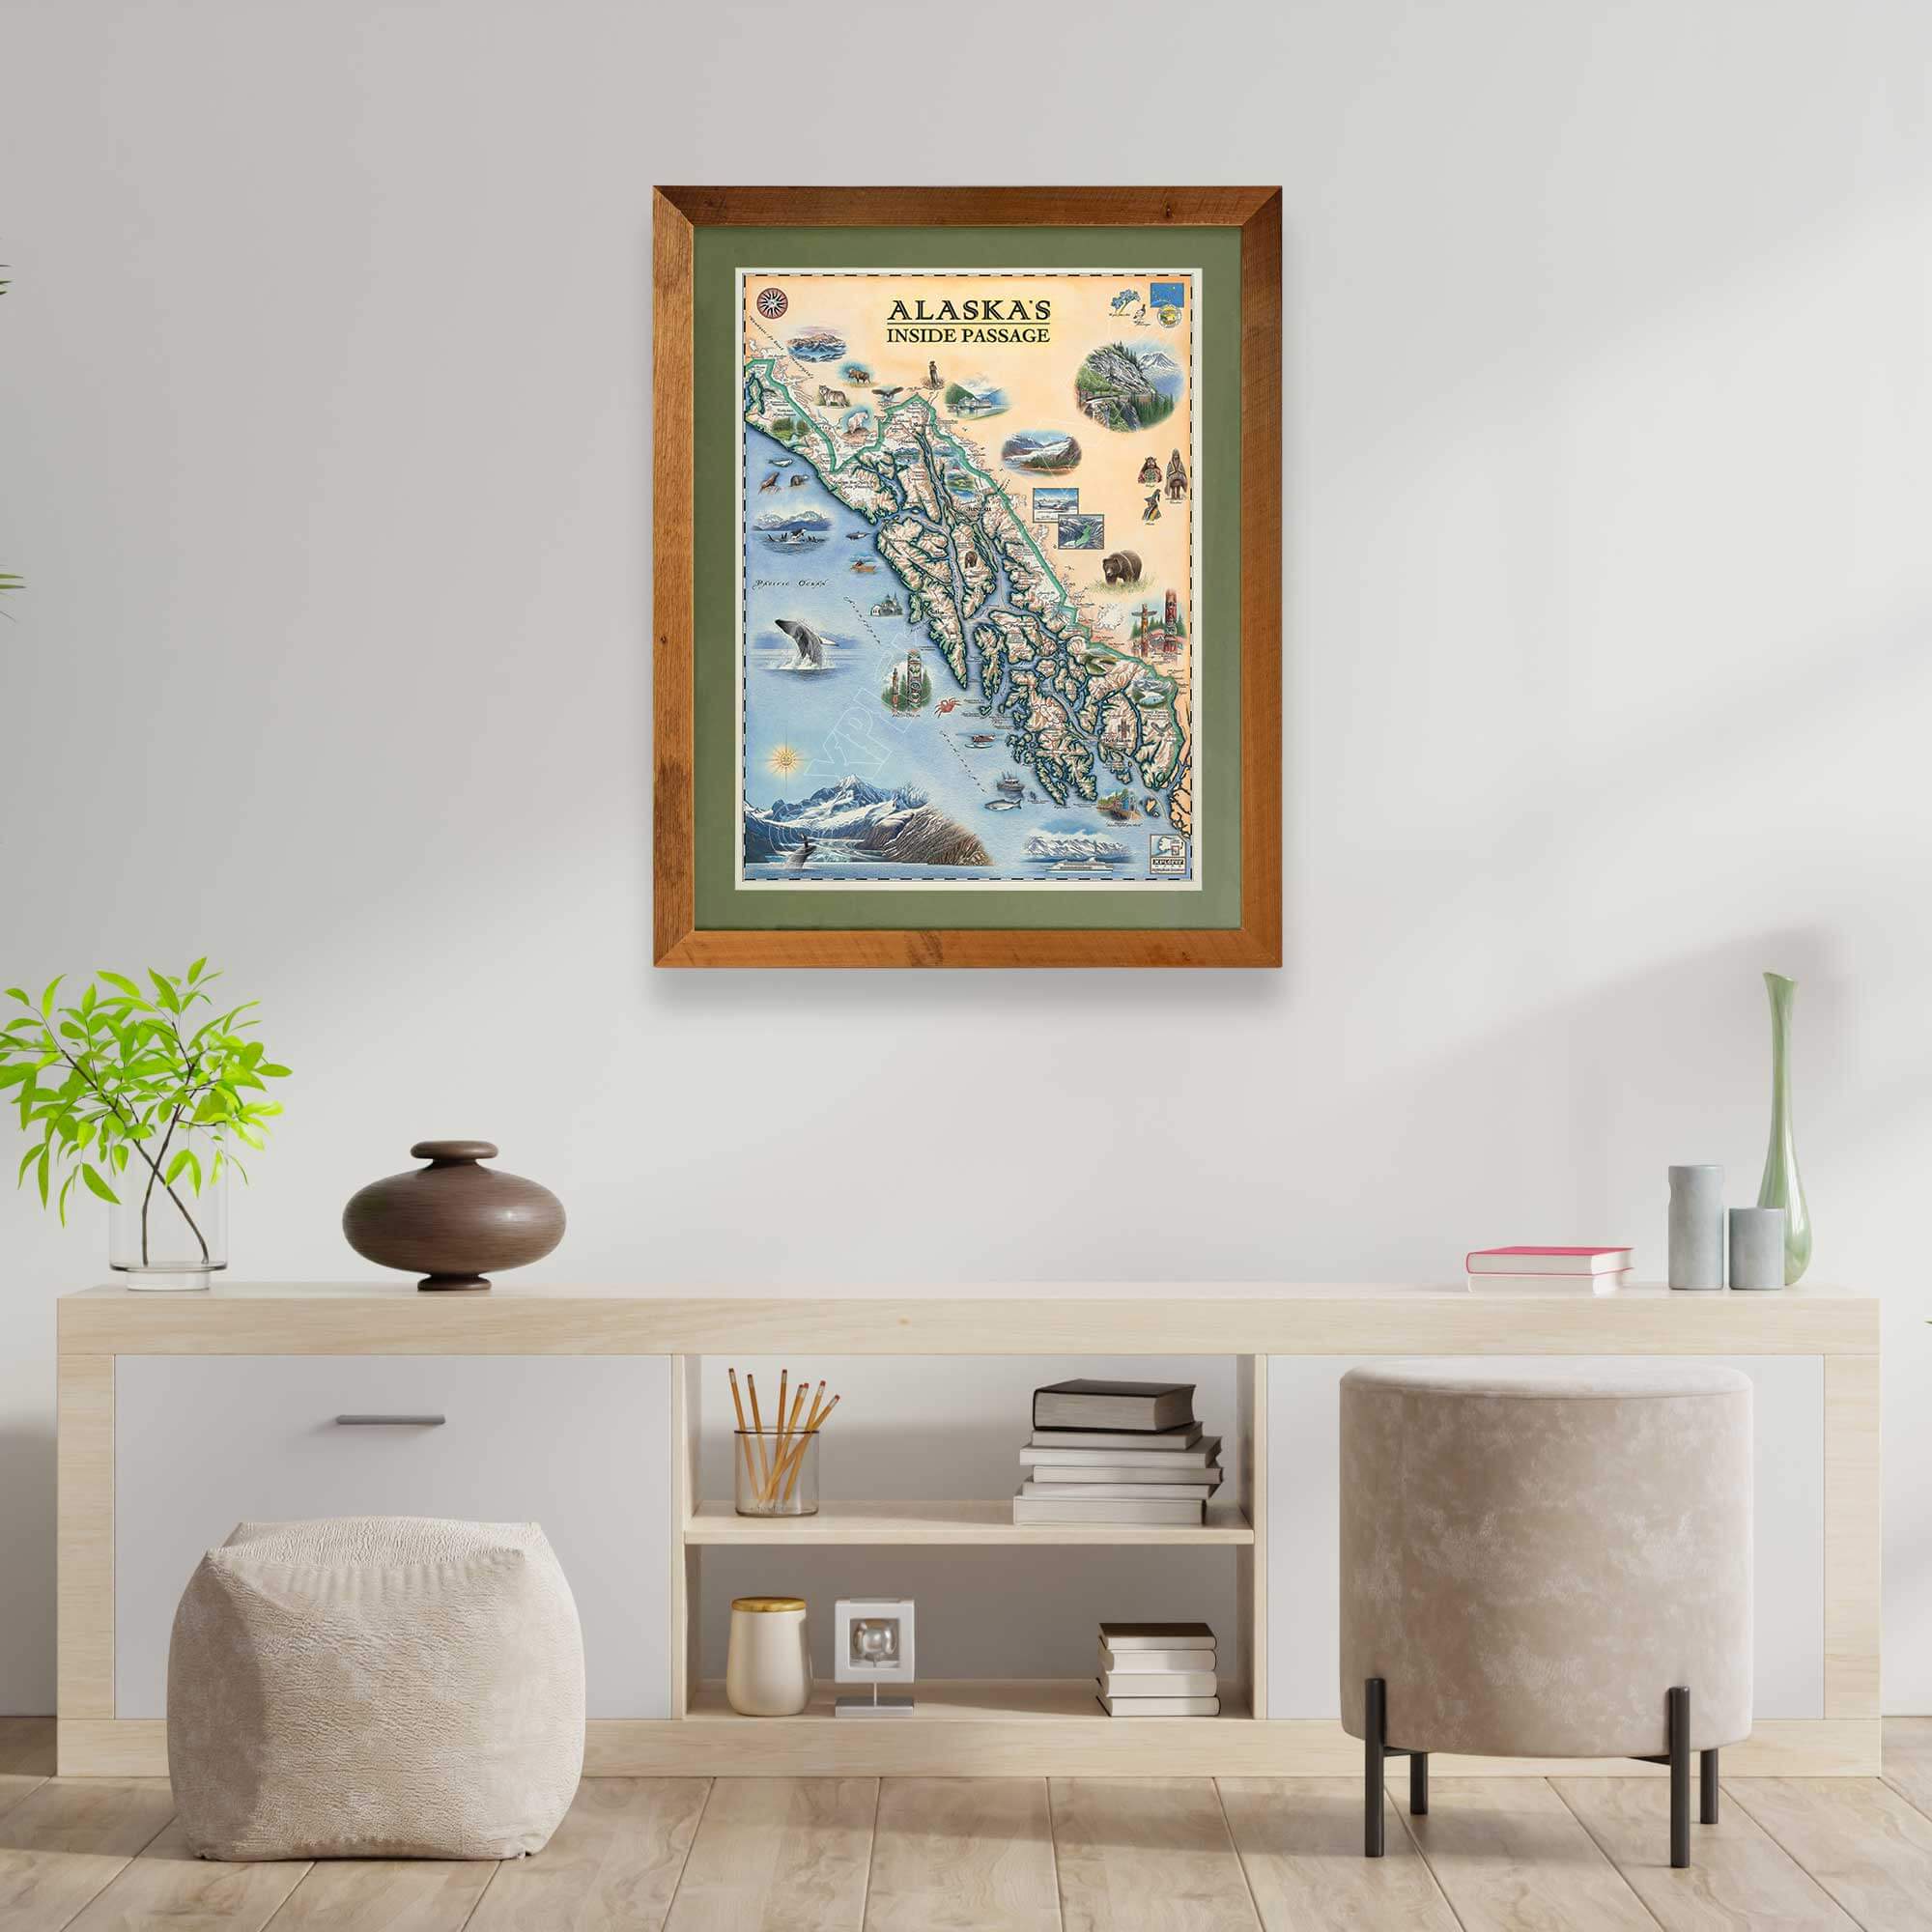 Alaska's Inside Passage Framed Map hanging on a wall above a cream colored desk with chair. 